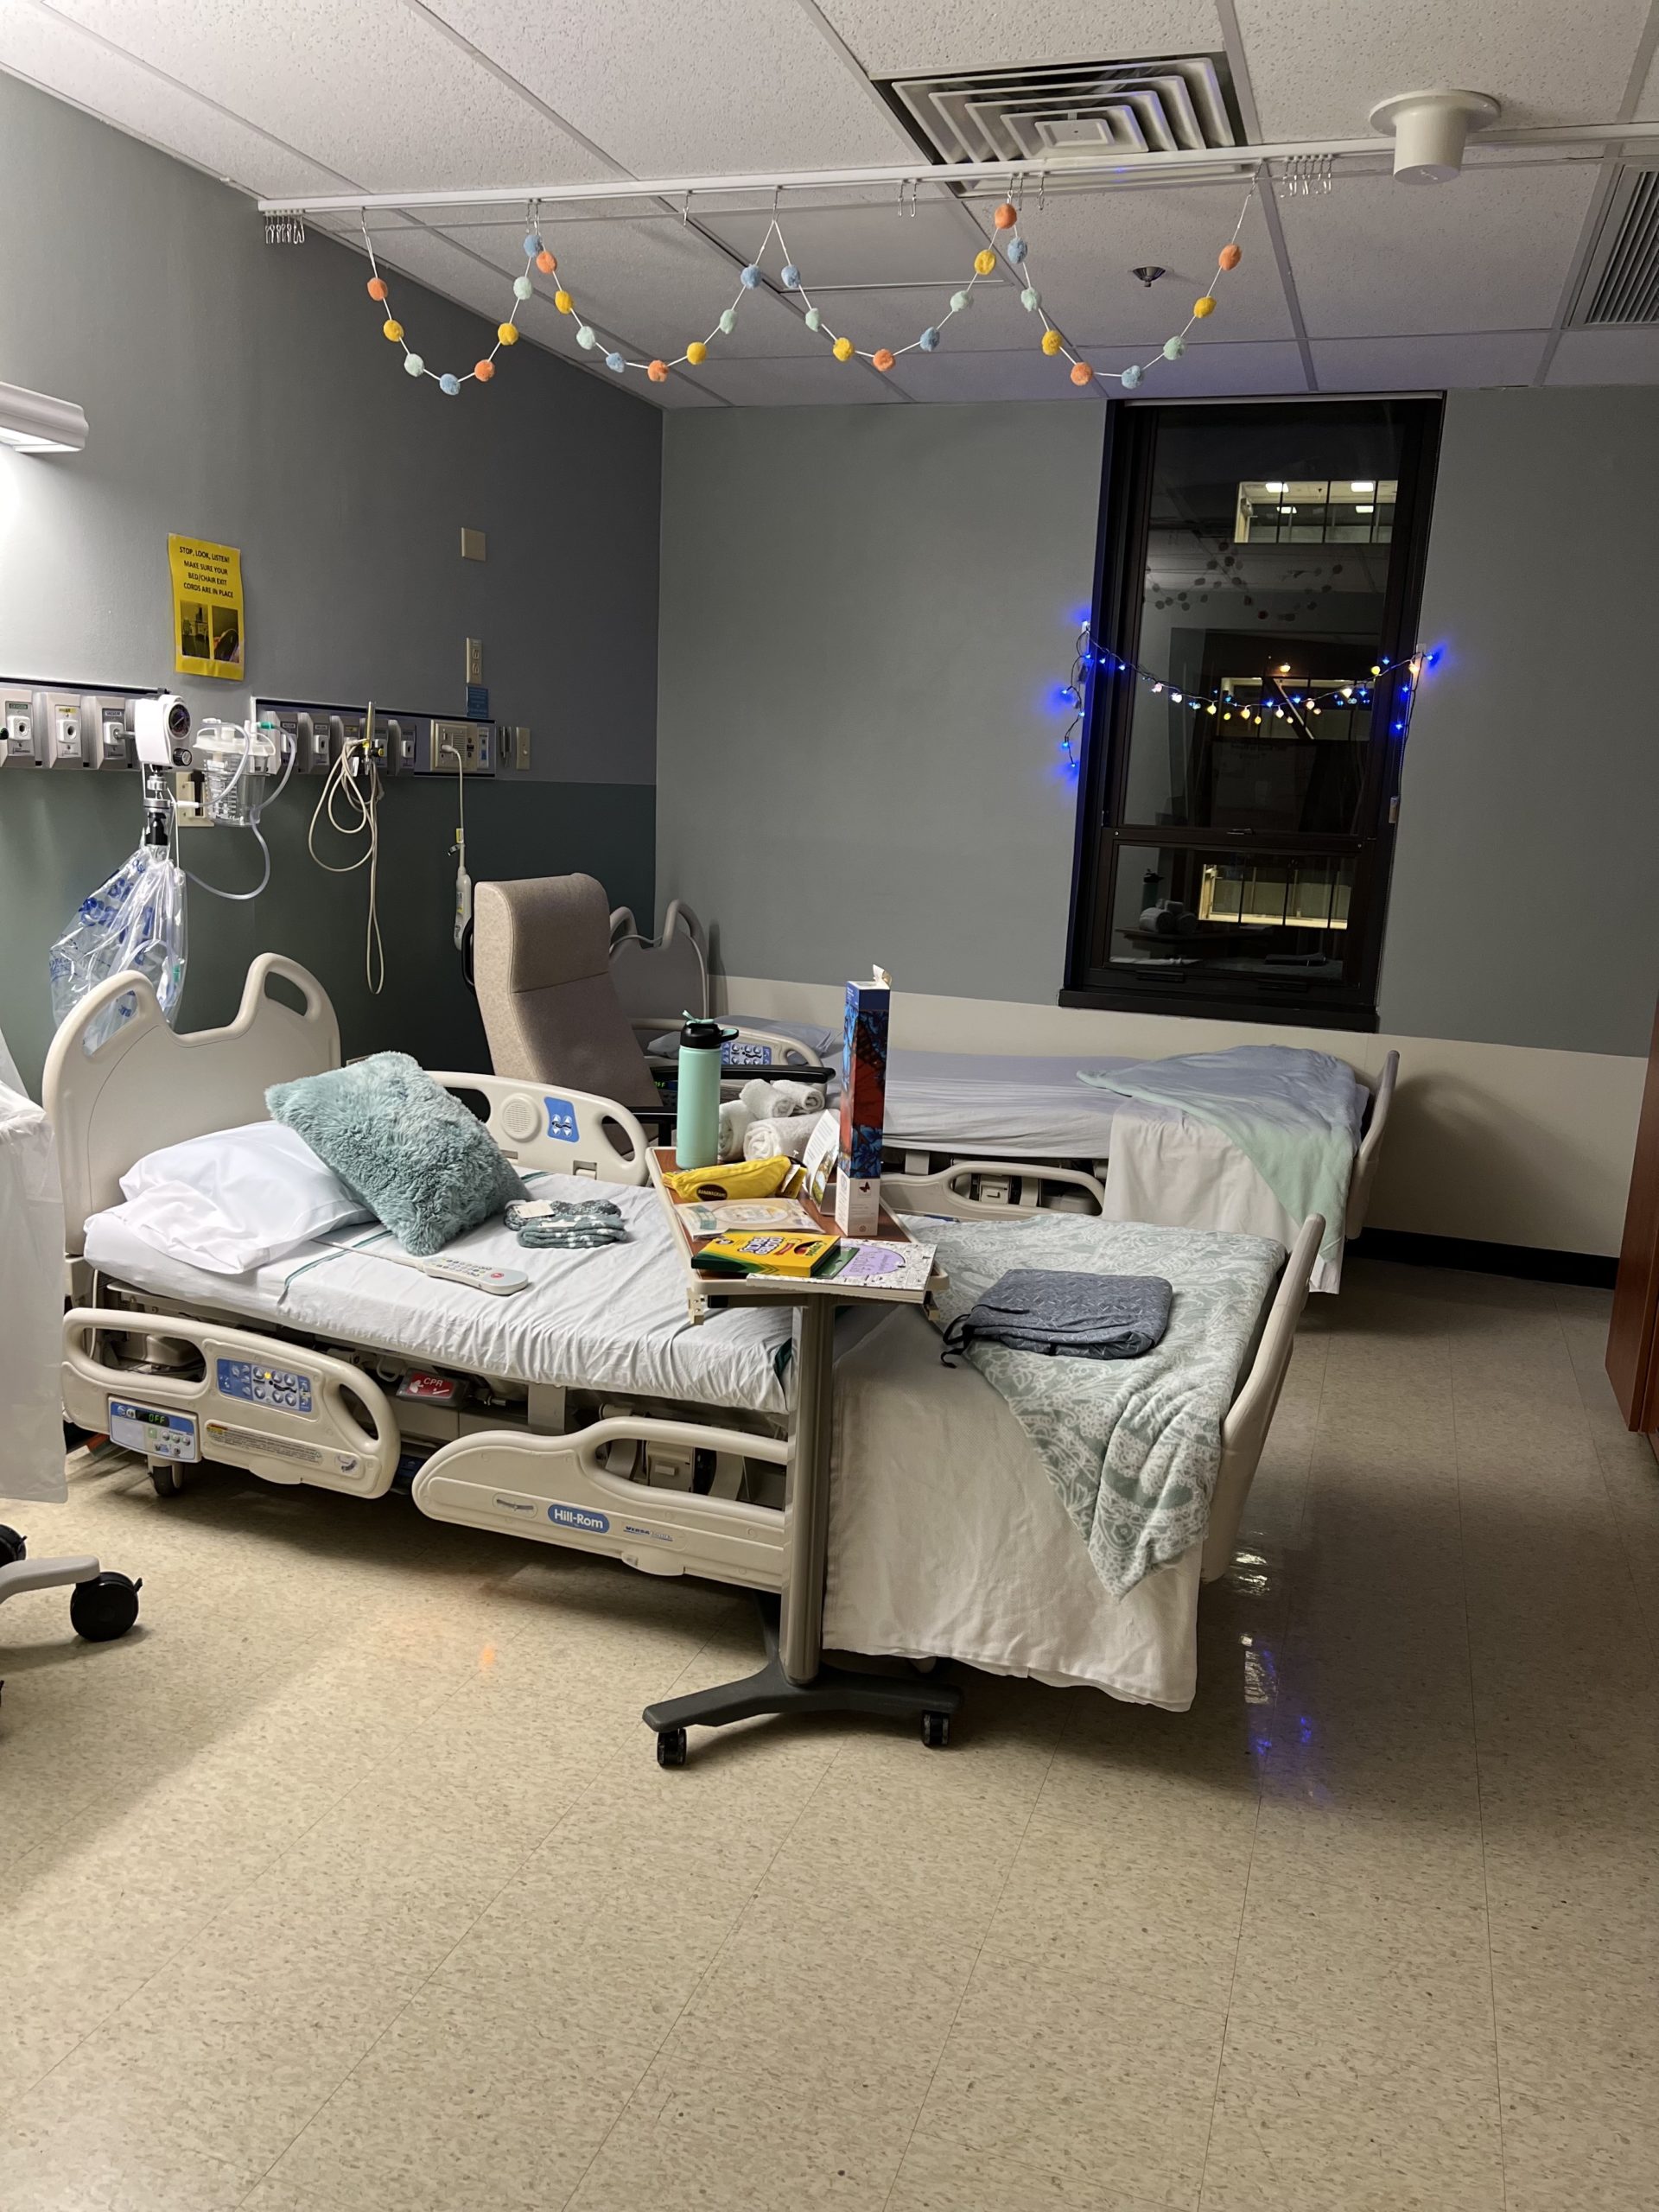 A hospital room decorated with holiday lights